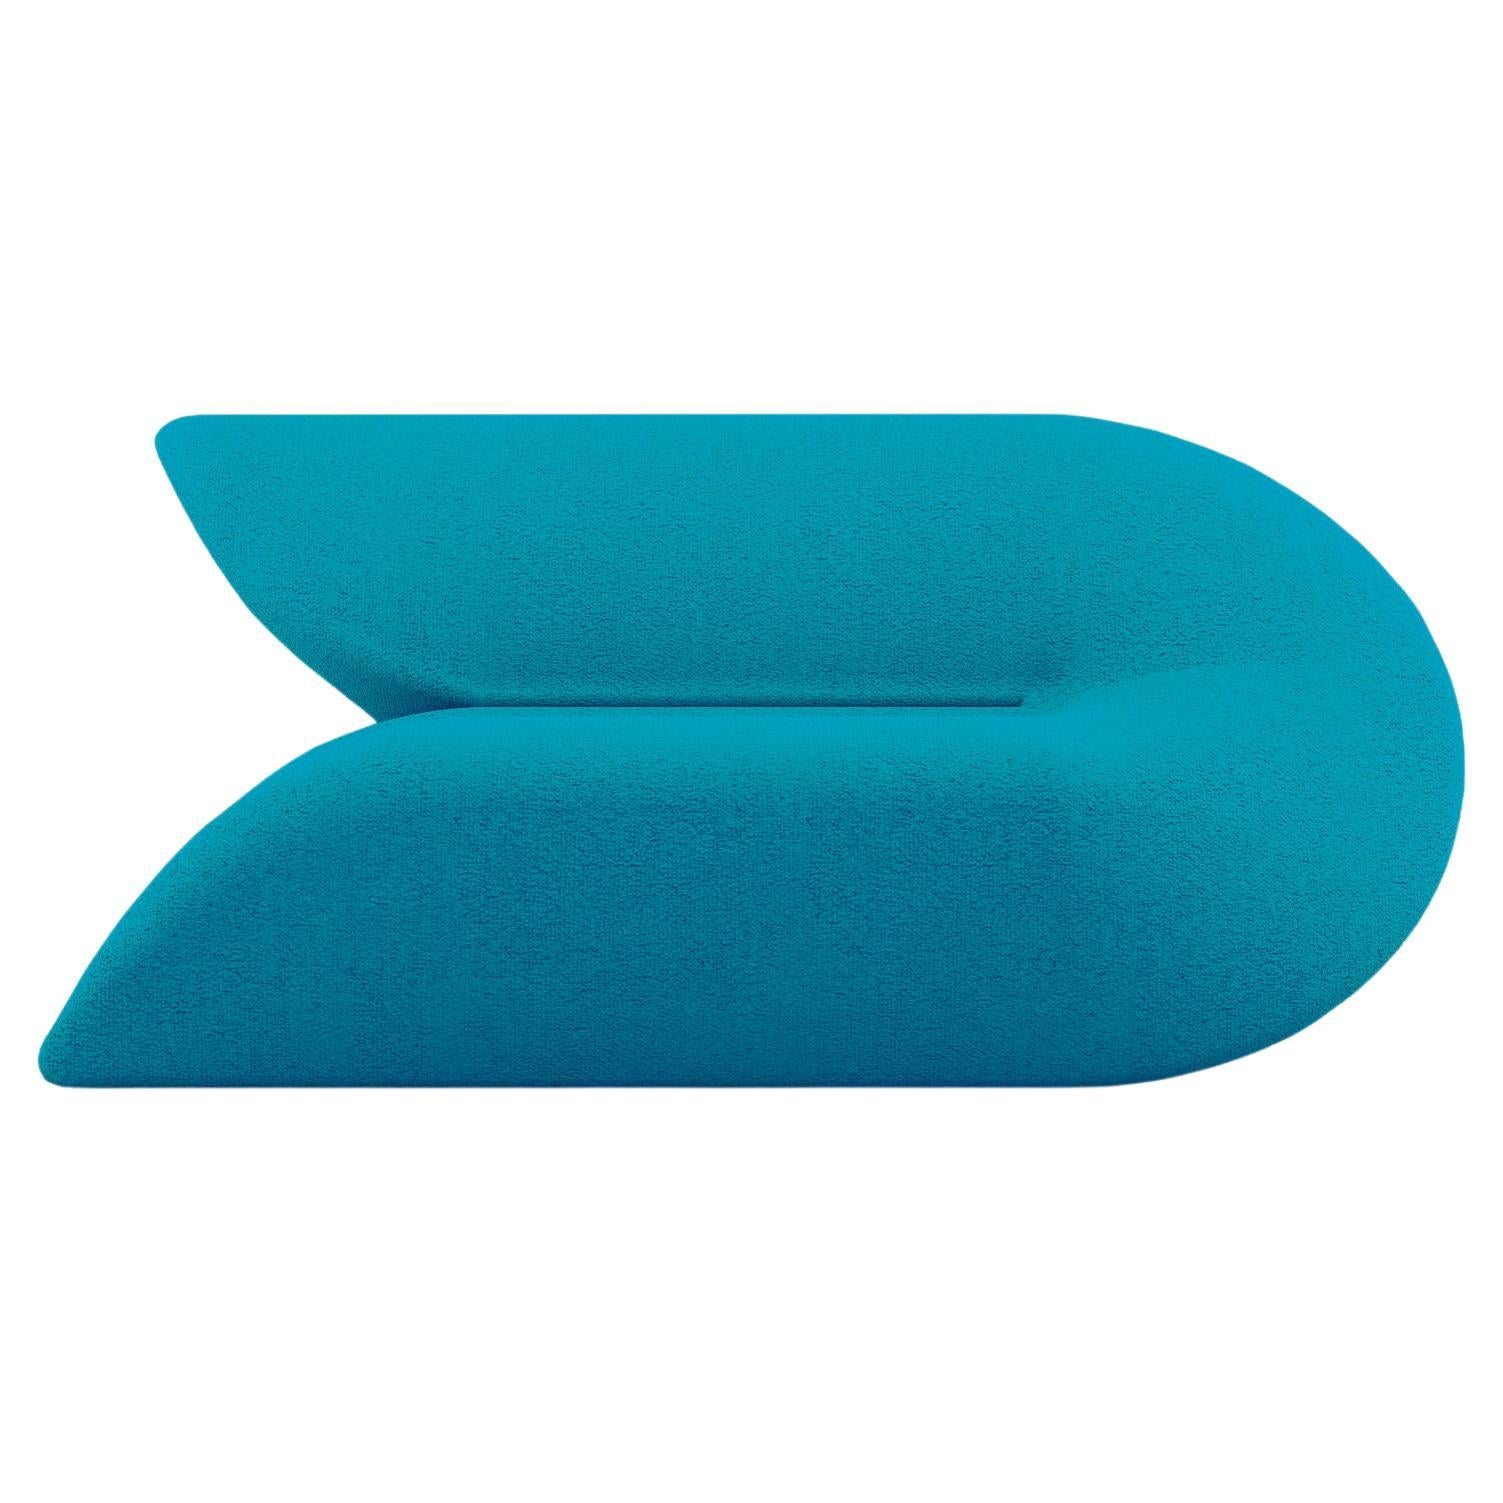 Delta Sofa - Modern Sky Blue Upholstered Two Seat Sofa For Sale